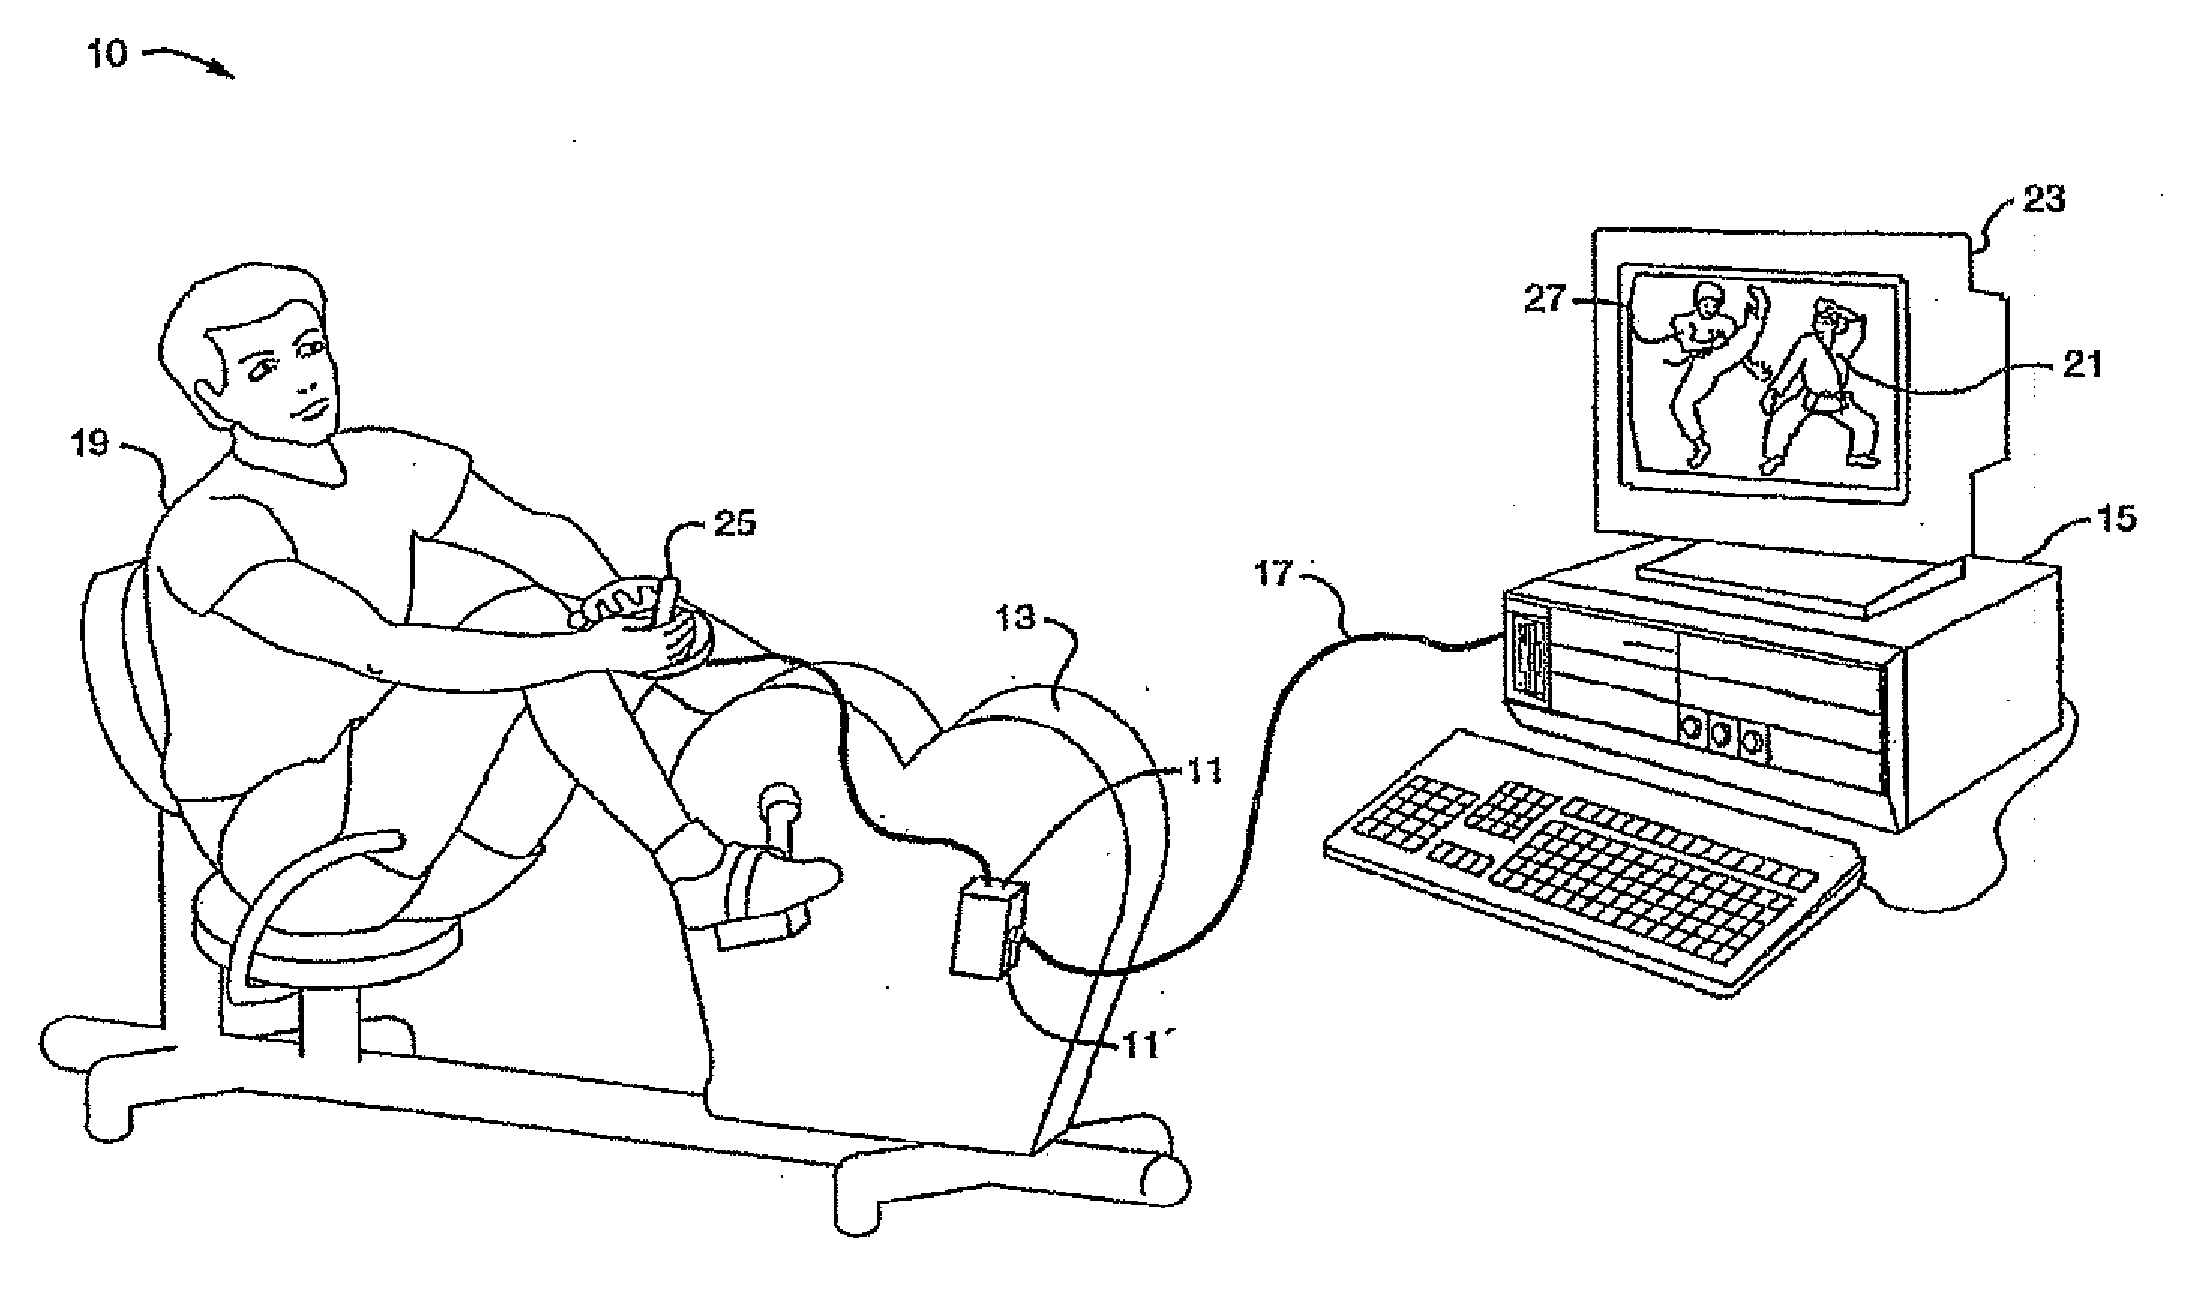 Systems and methods for using a video game to achieve an exercise objective